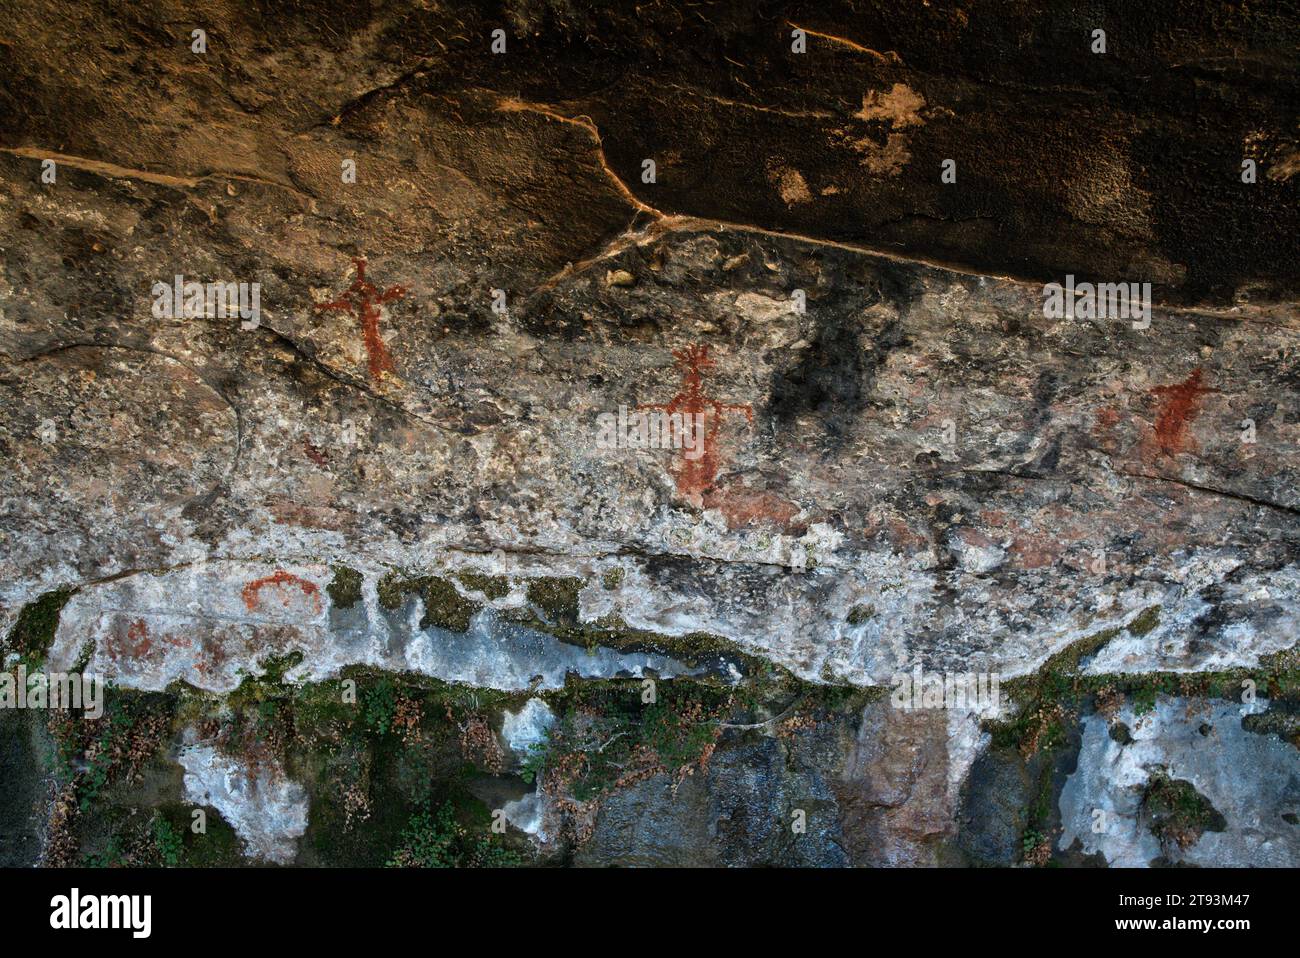 The Spring Cave Pictographs at Canyonlands National Park Stock Photo